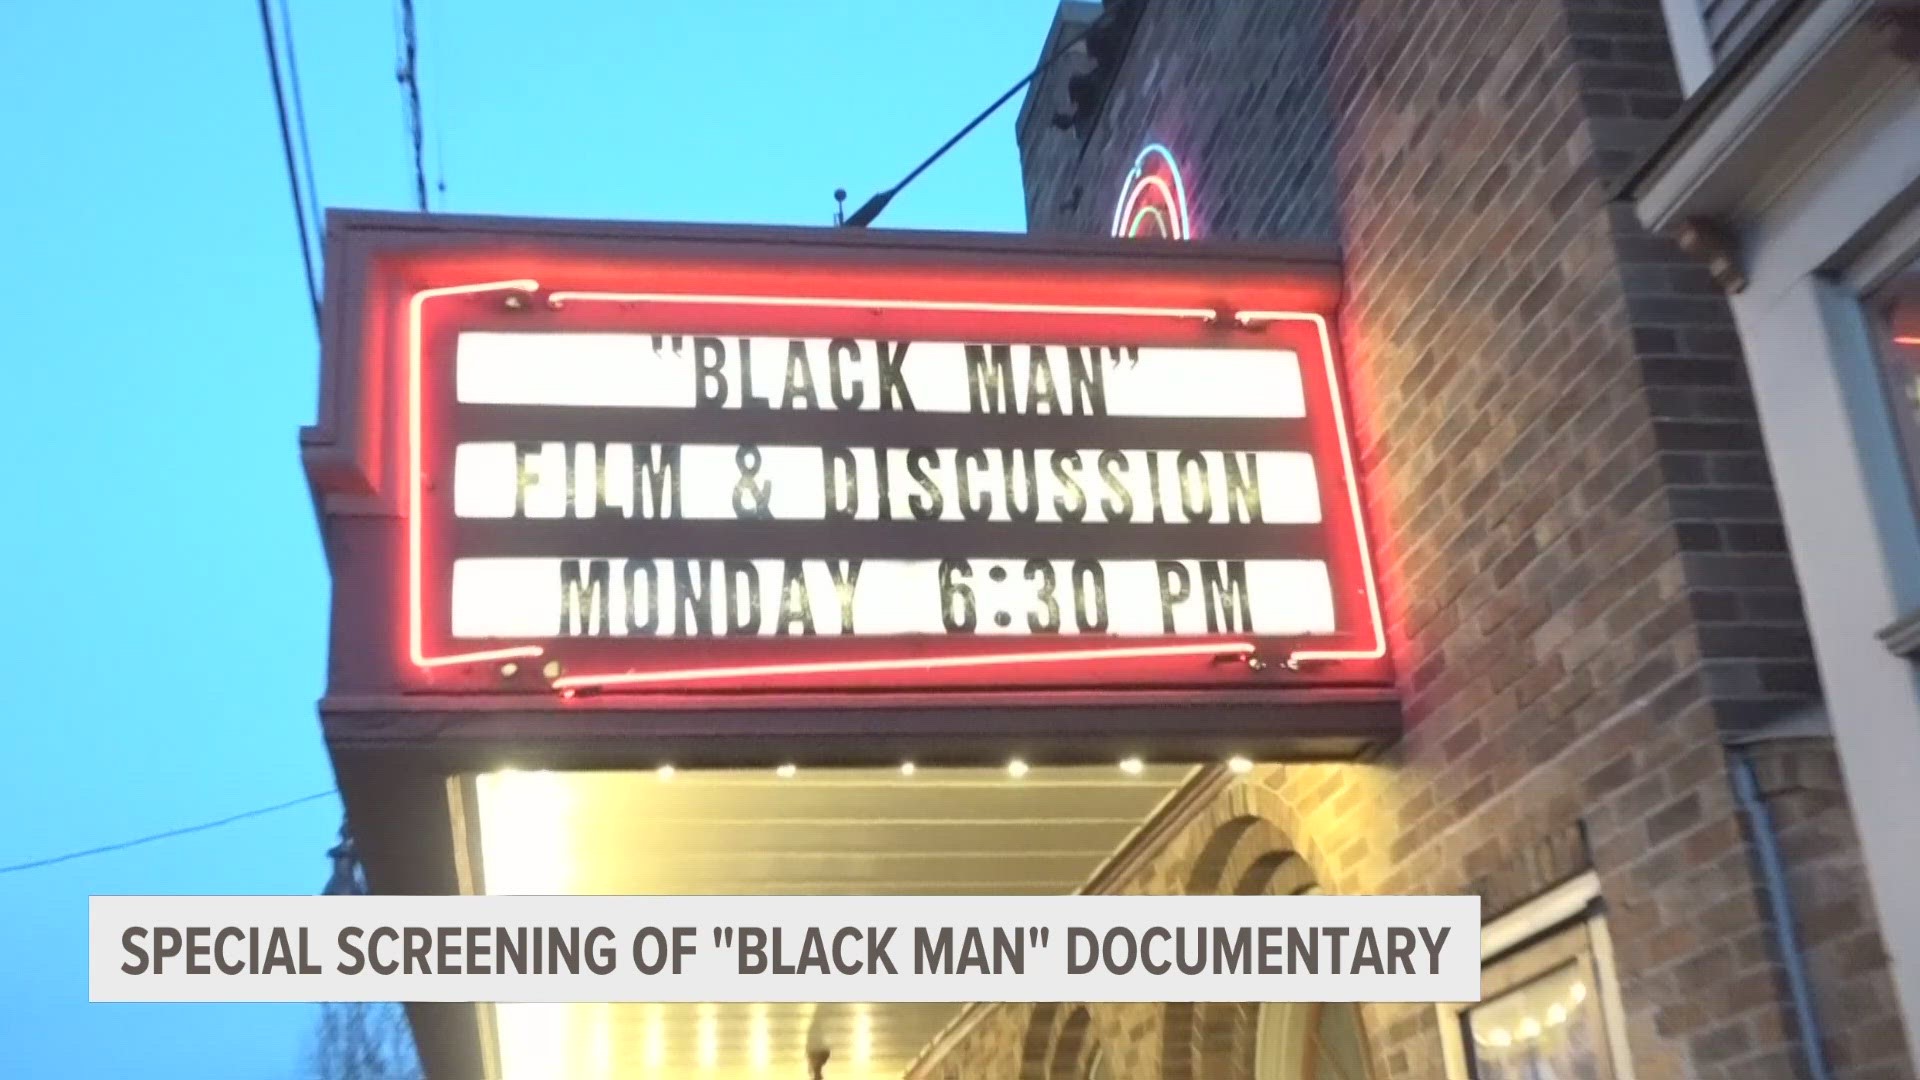 The film tells the story of Black Muskegon natives and their lives.